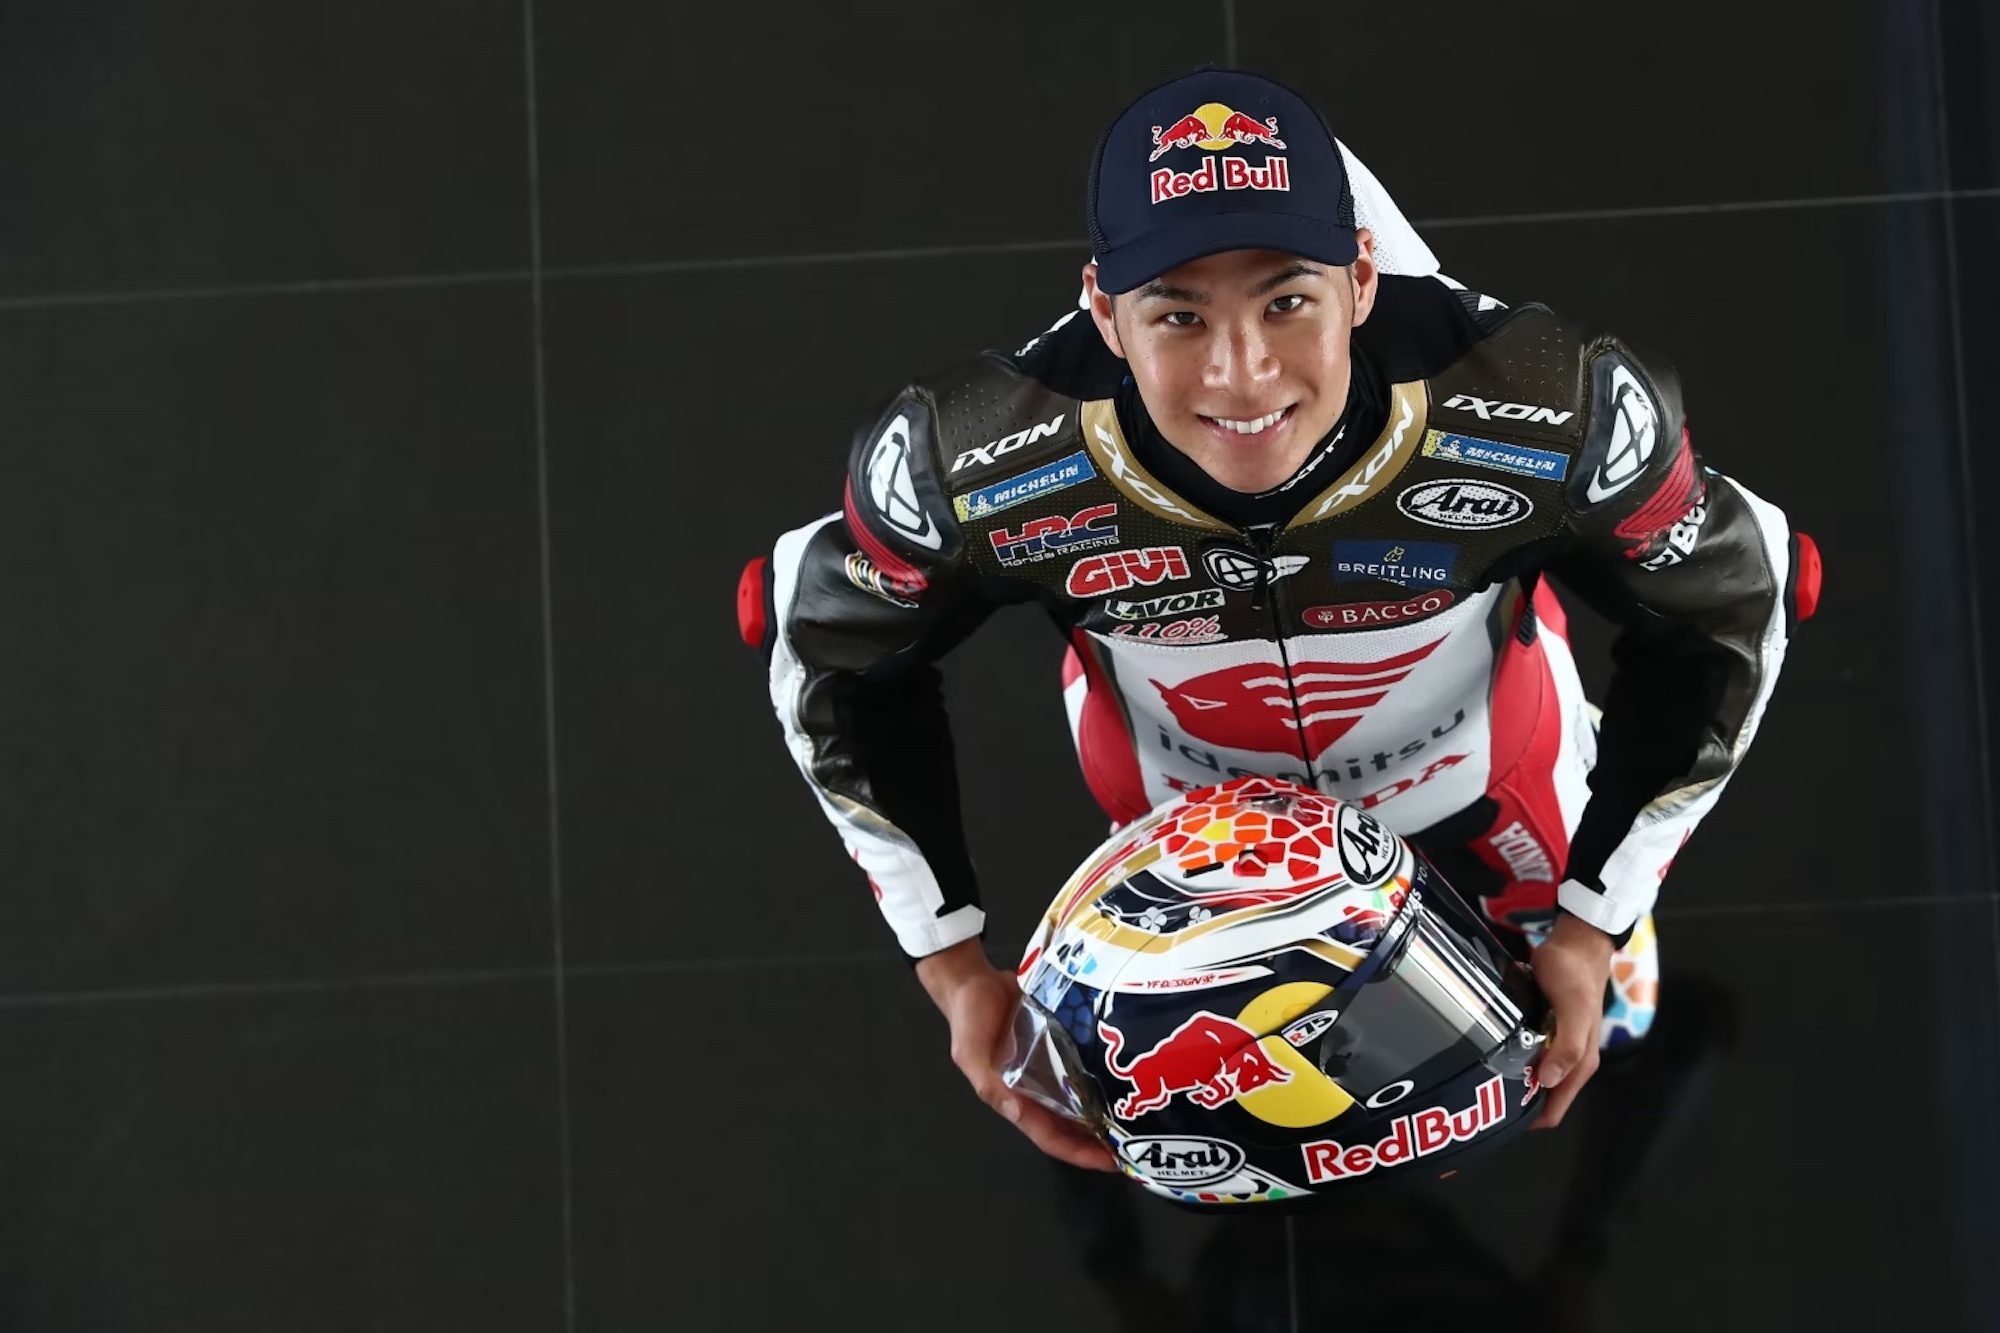 Takaaki Nakagami, riding for LCR Honda in this year's MotoGP efforts. Media sourced from RedBull.